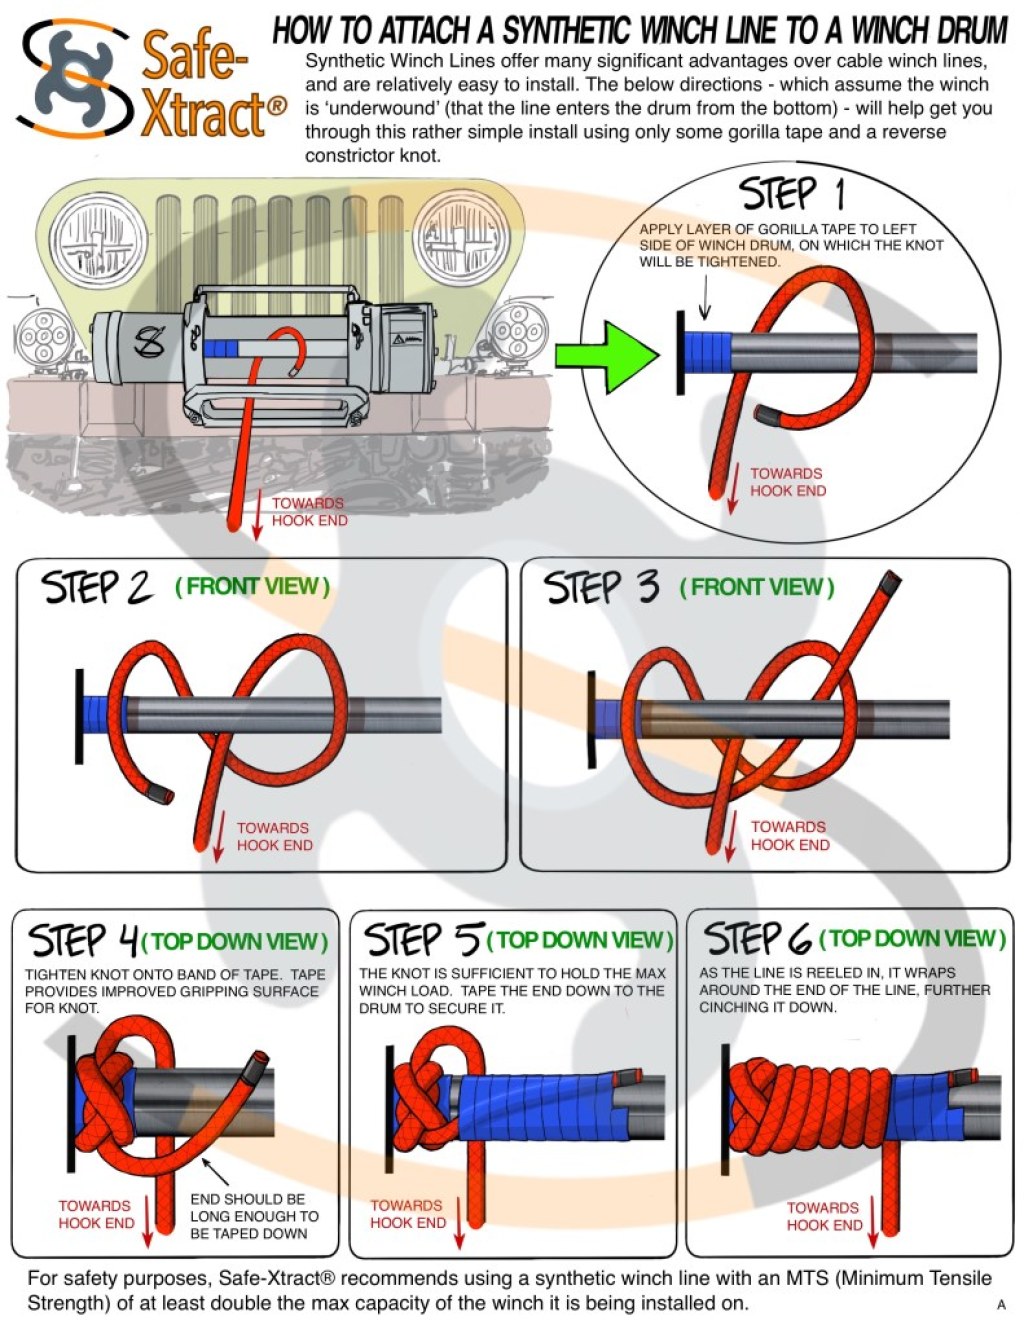 attach synthetic winch rope to drum - Attaching Synthetic Winch Line to Winch Drum - Safe-Xtract®